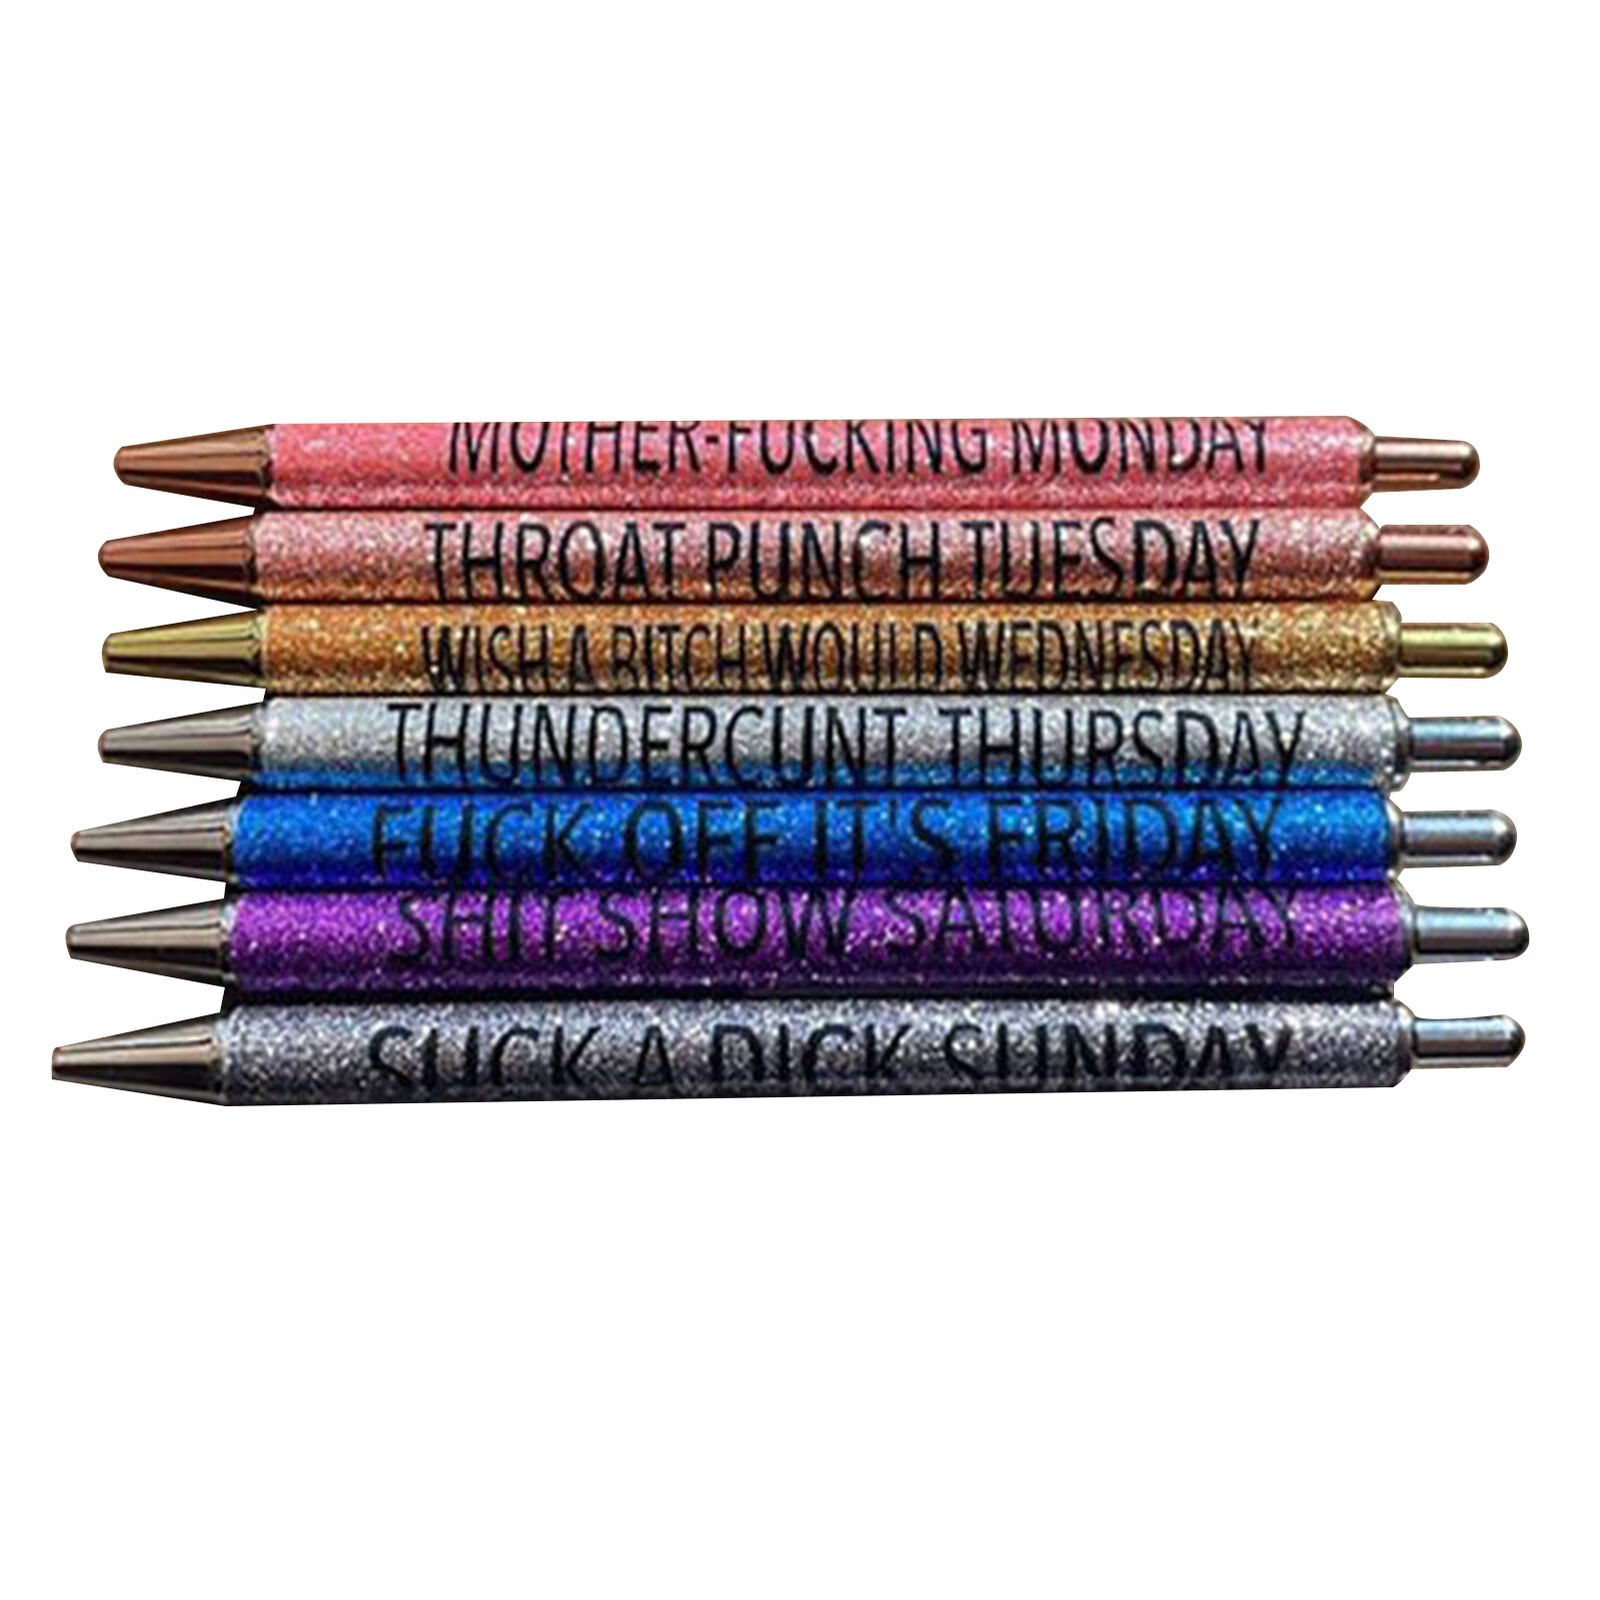 Great Choice Products 7X Funny Pens: Swear Words Daily Pen Set